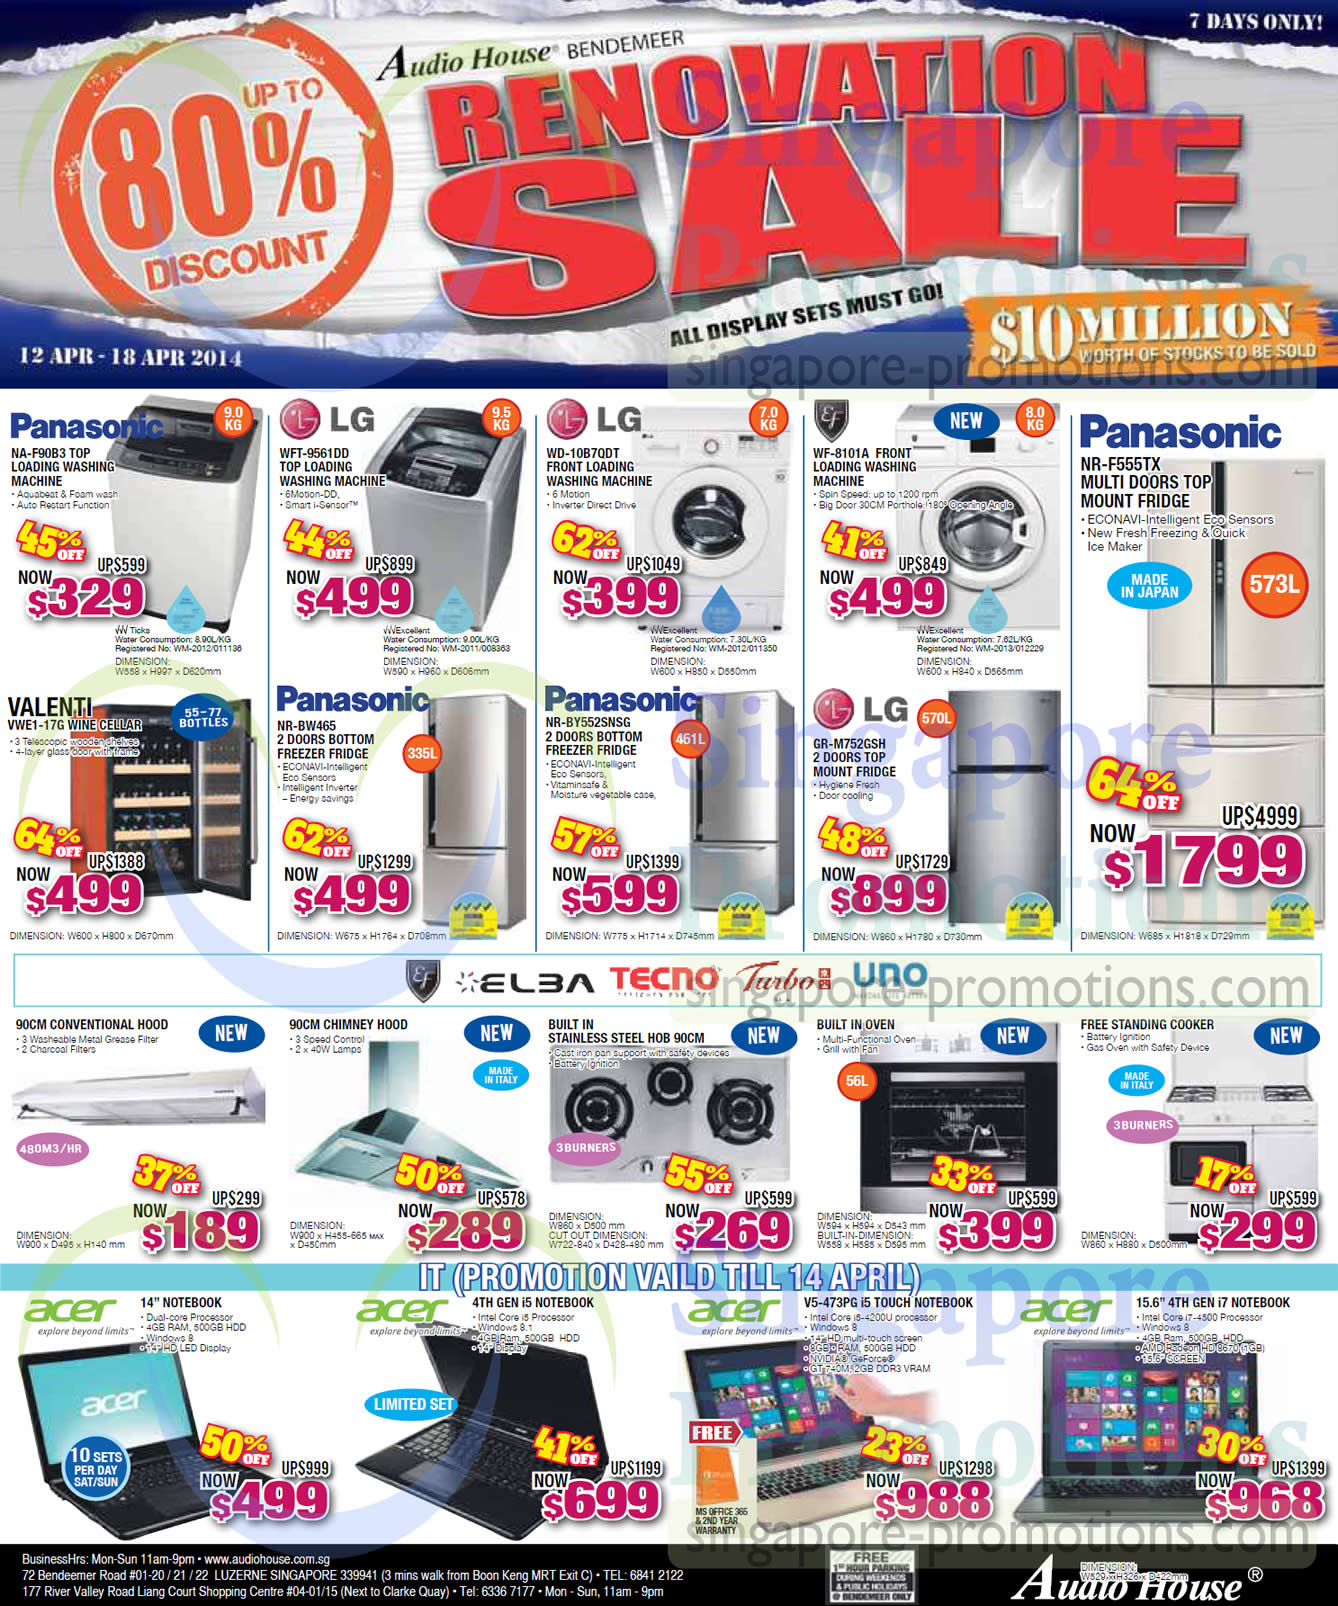 Featured image for Audio House Electronics, TV & Appliances Offers @ Bendemeer 12 - 18 Apr 2014